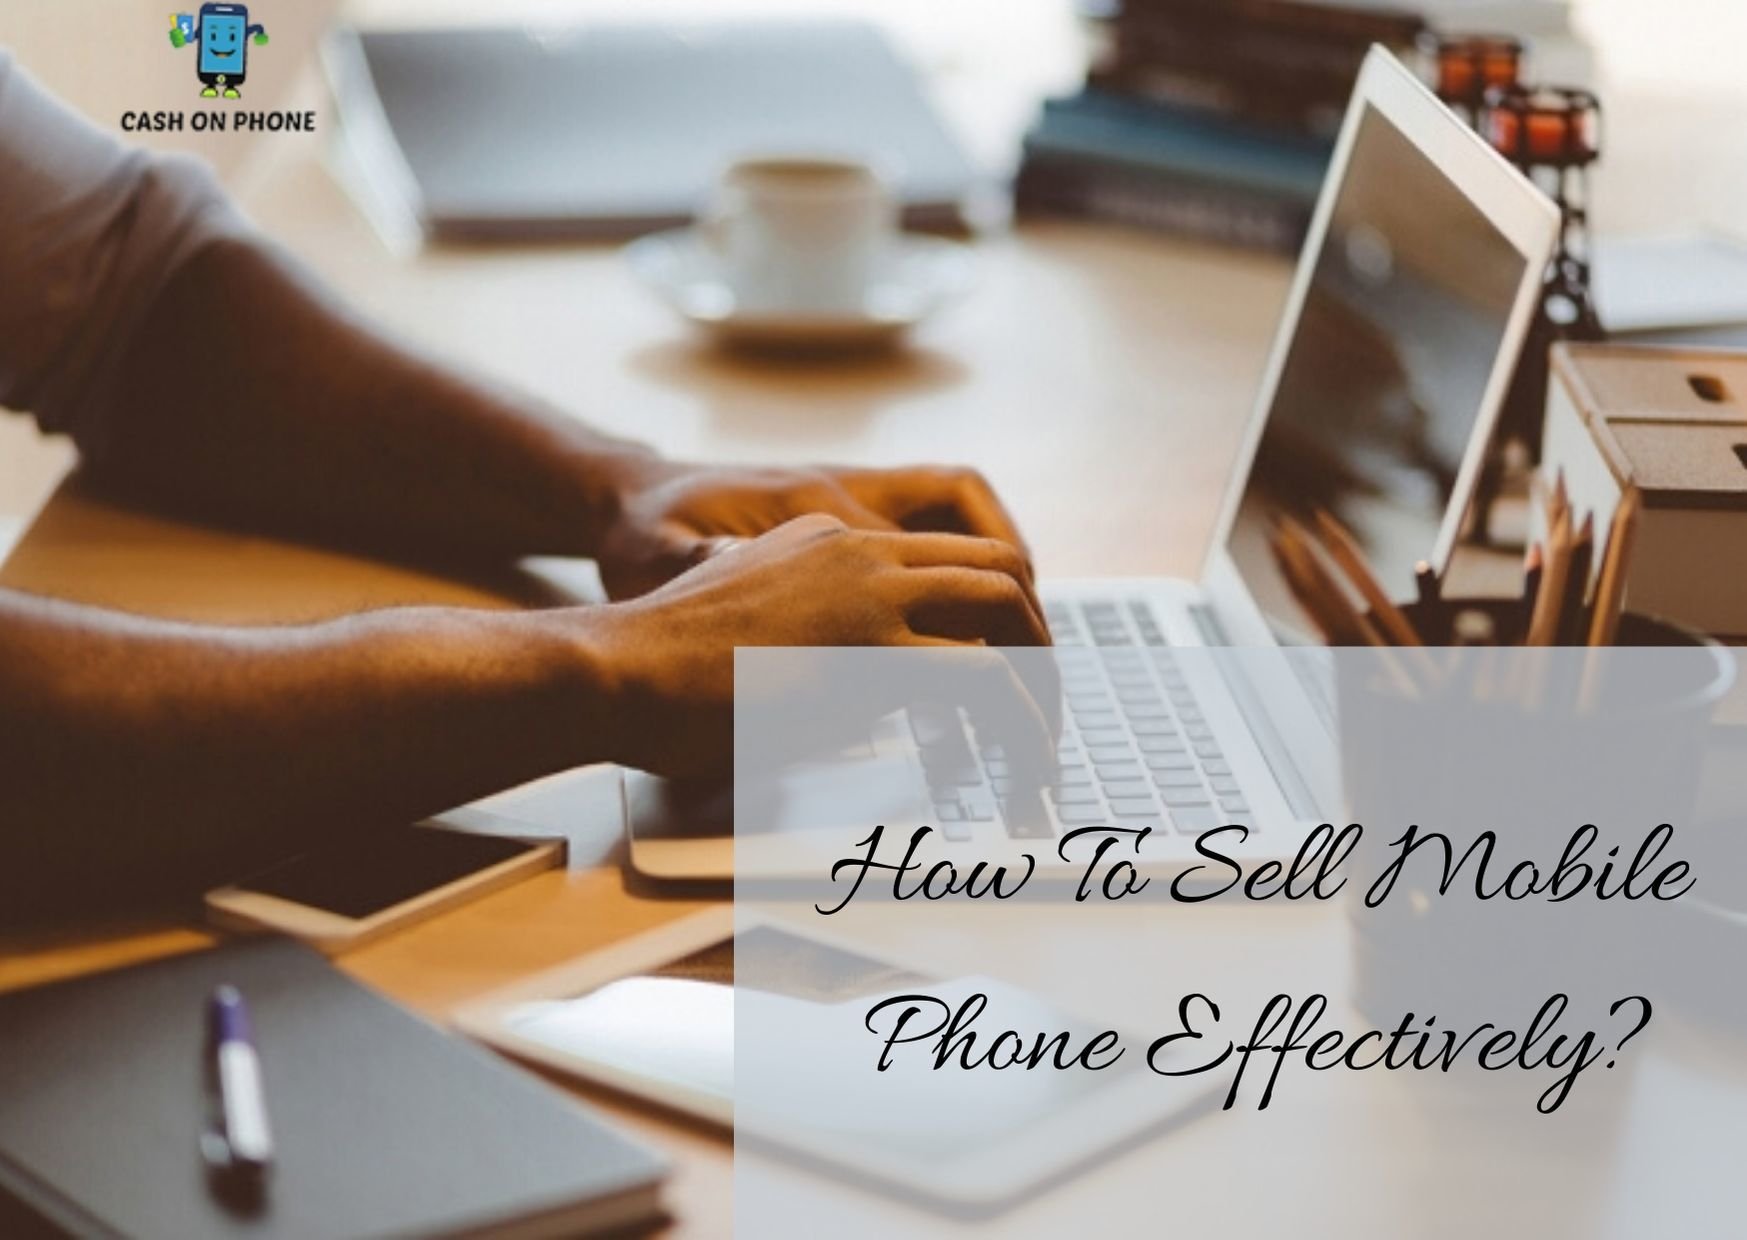 How To Sell Mobile Phone Effectively?